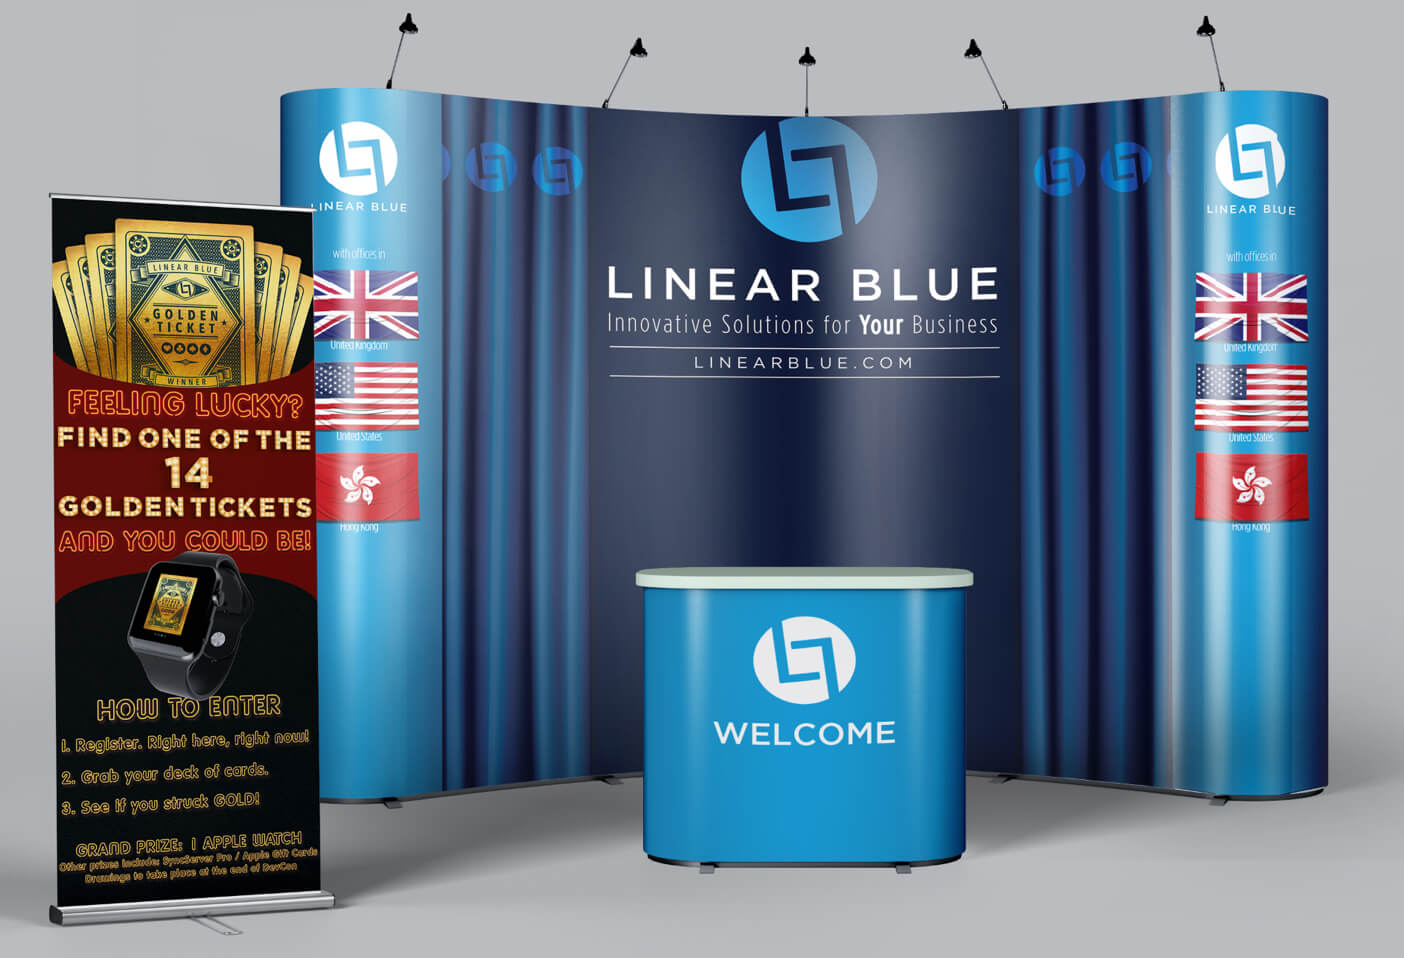 Linear Blue Conference Booth Design & Fulfillment